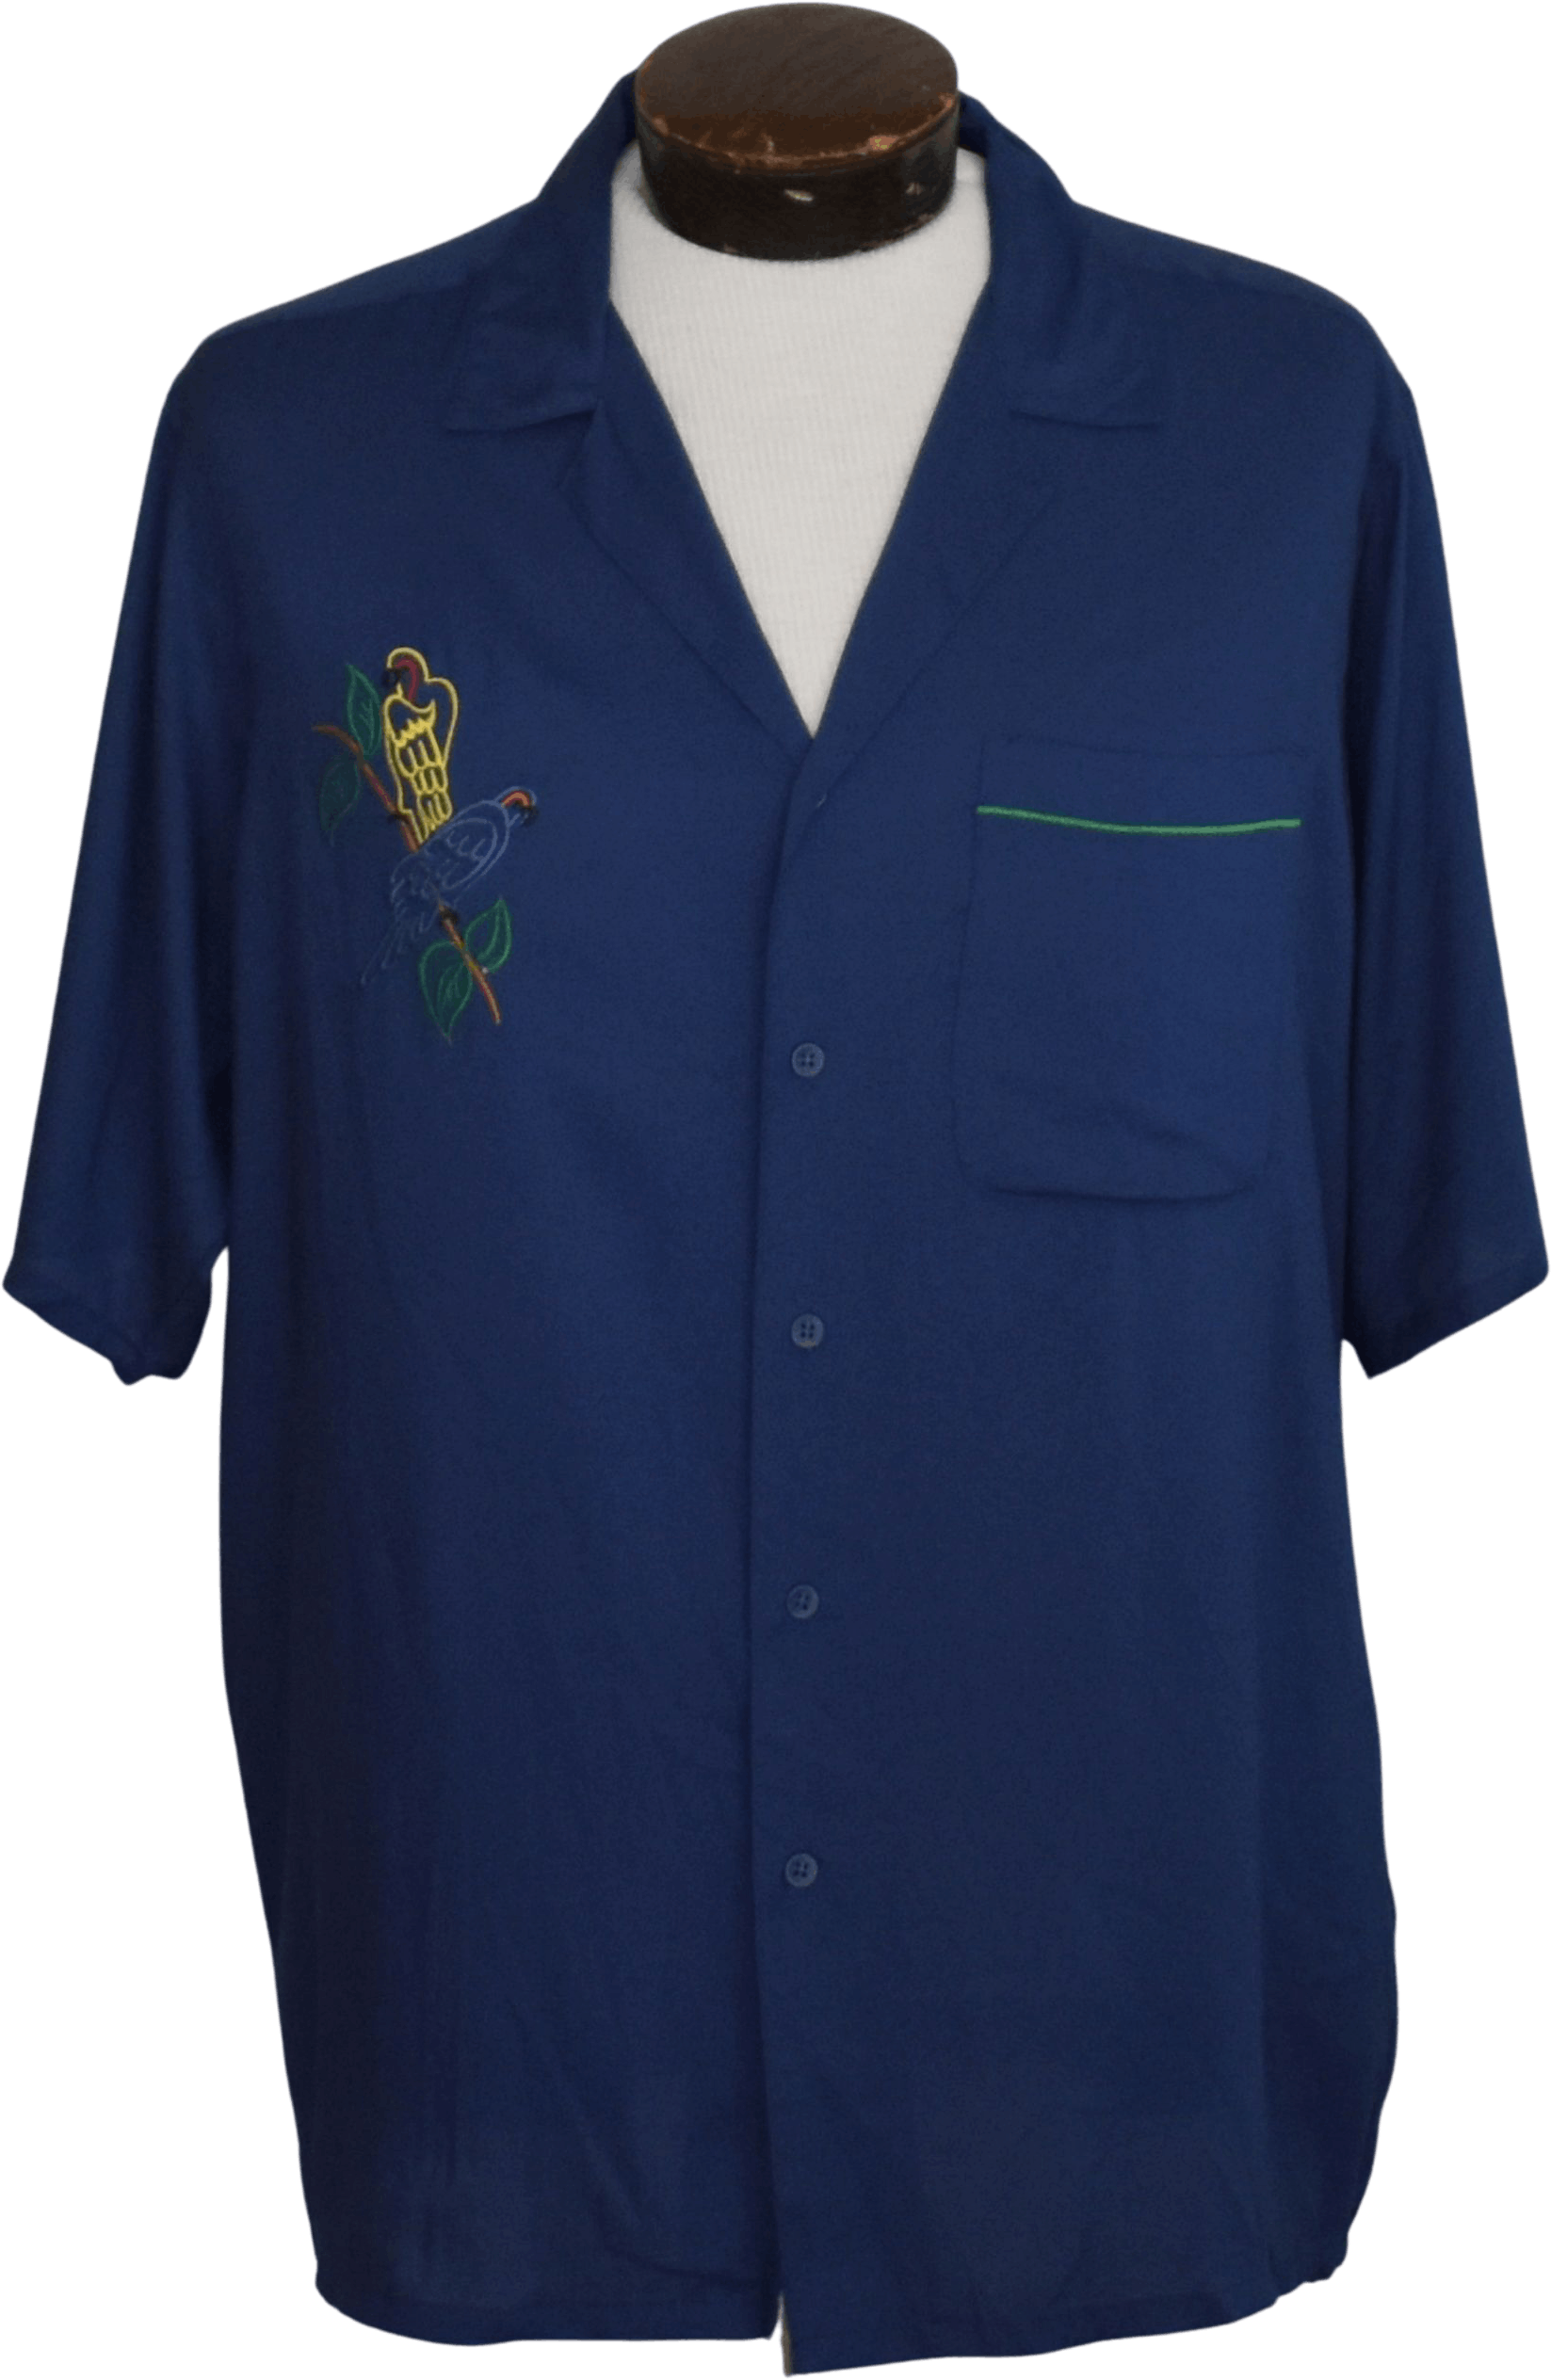 Vintage 80's Parrot Embroidered Men's Shirt by Brittania | Shop THRILLING